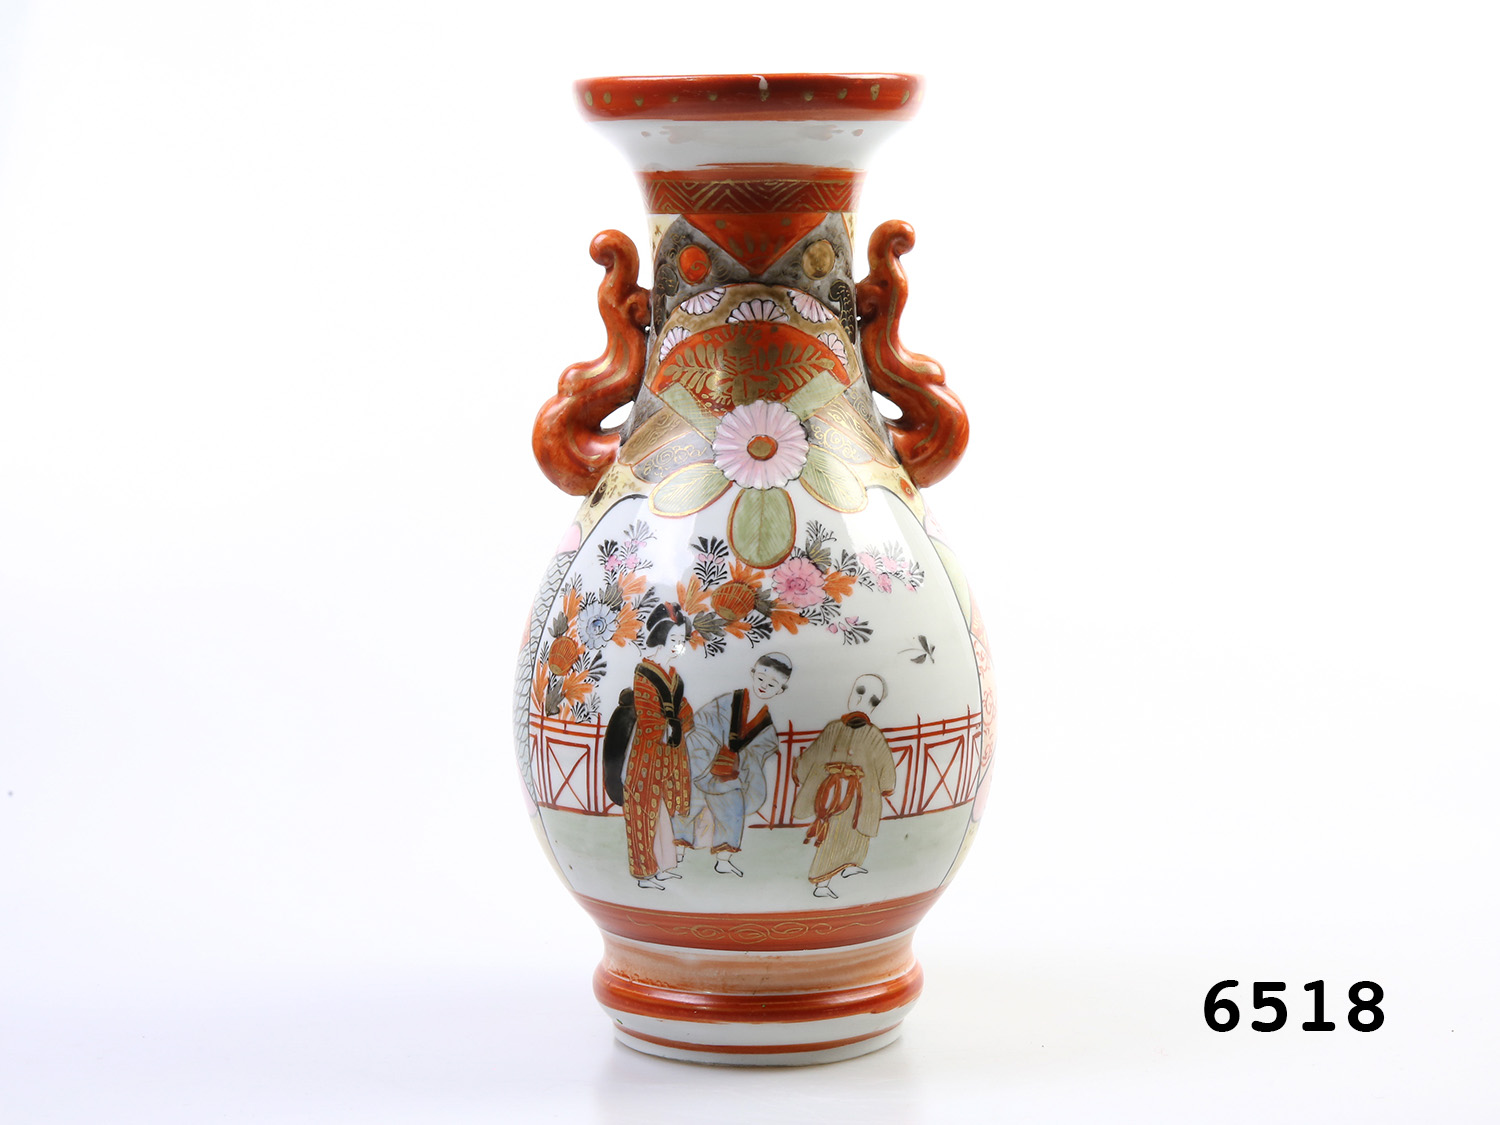 Antique Japanese Kutani vase. 2 handled Meiji period vase with Japanese figures to one side and birds on reverse side. c1868-1912 Measures 75mm in diameter at base Main photo of vase showing the side with figures in kimonos